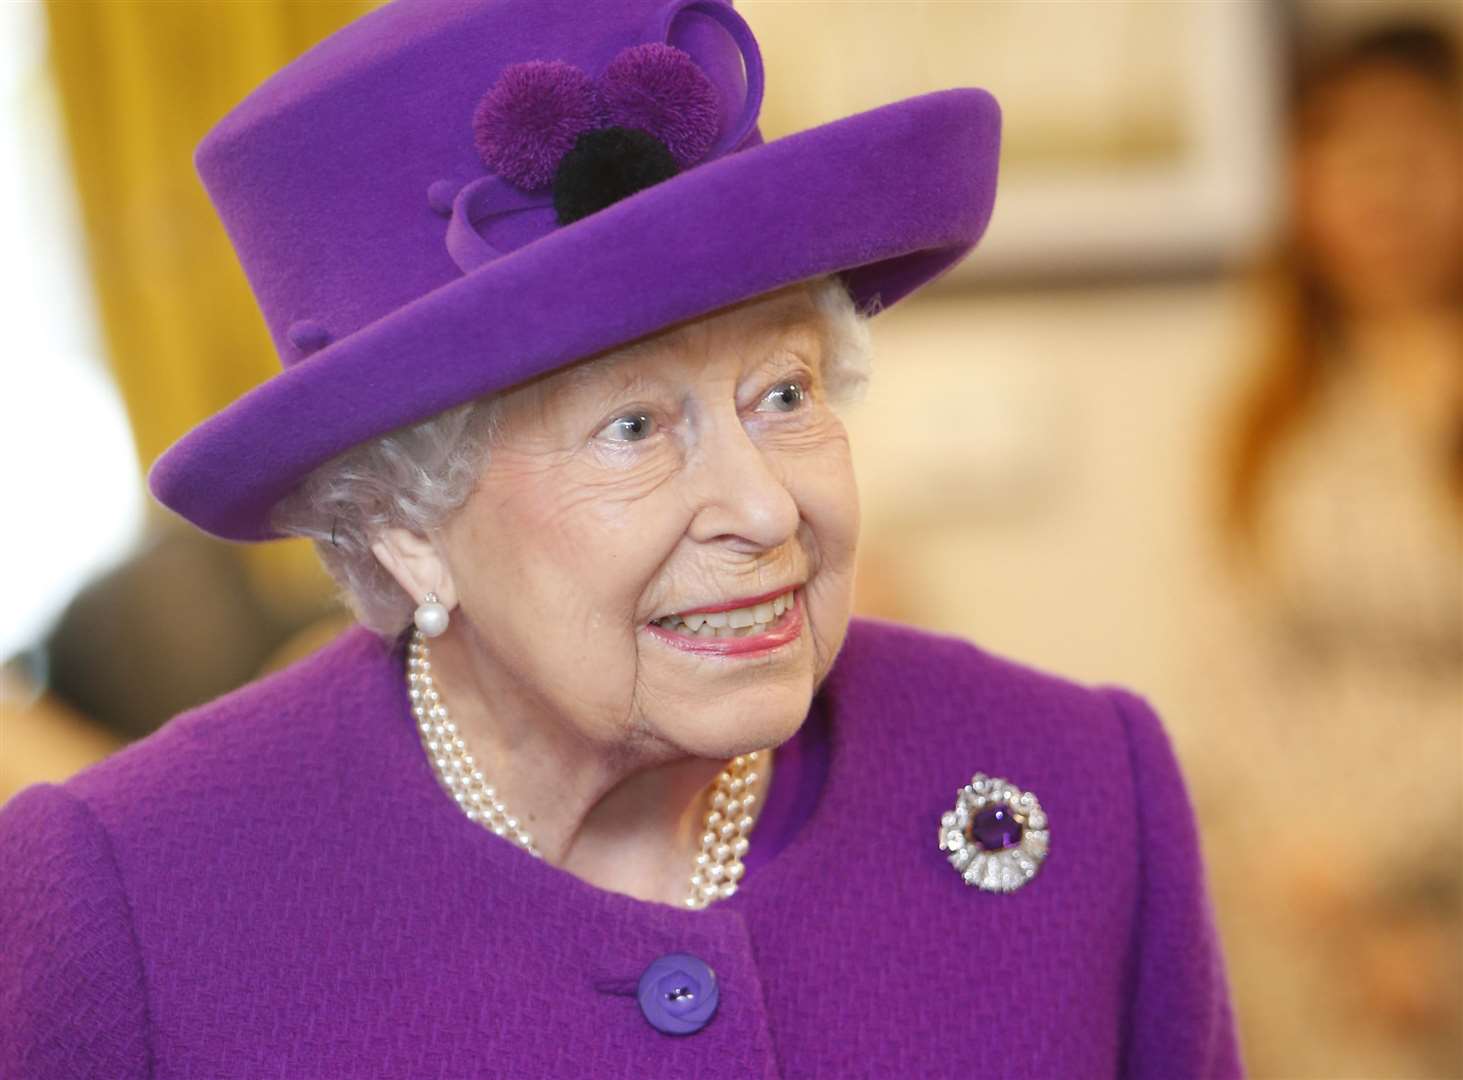 Her Majesty The Queen has two birthdays, one in April one in June